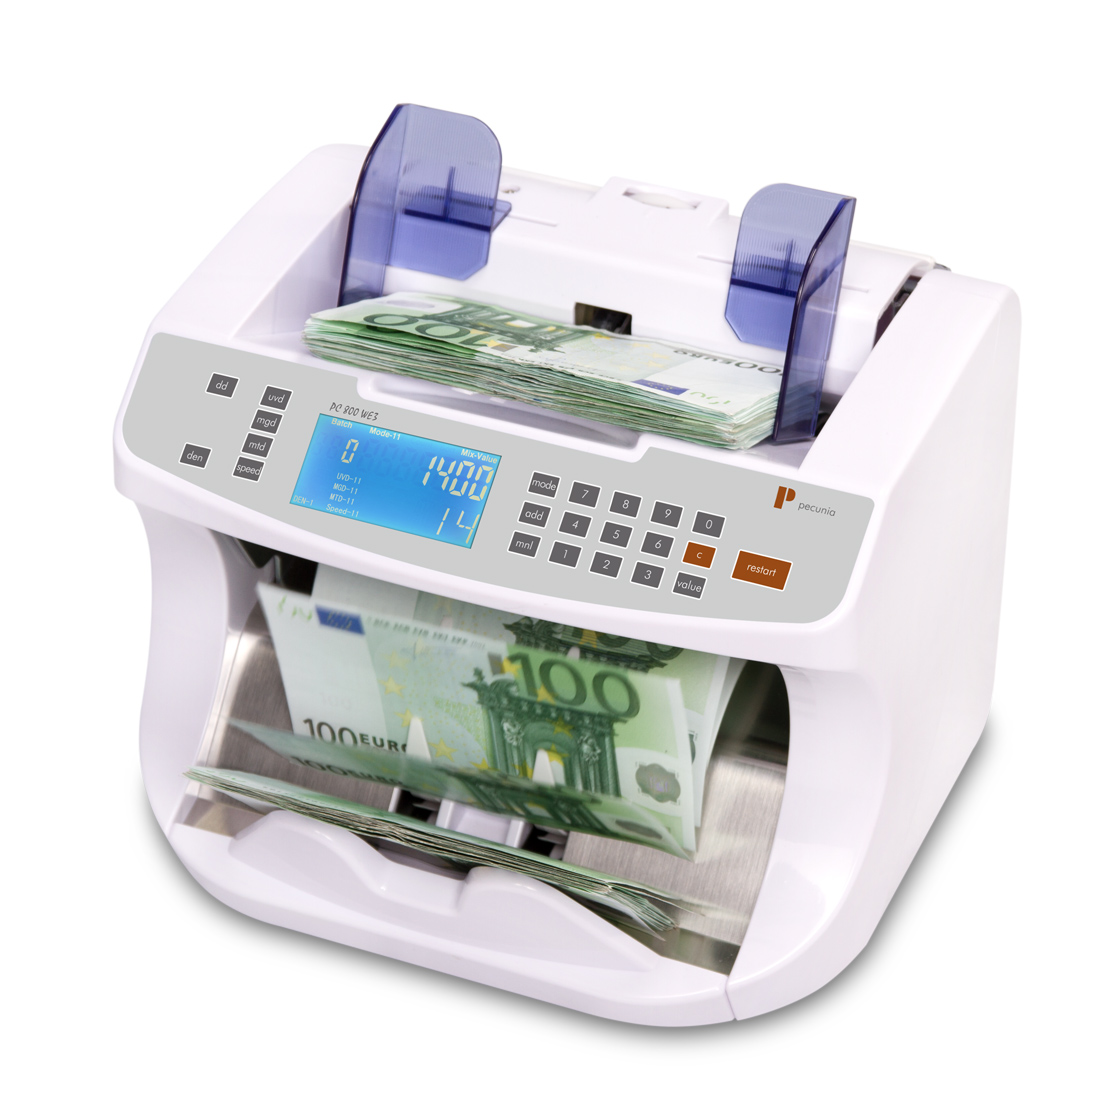 Banknotenzähler Pecunia PC 800 WE3